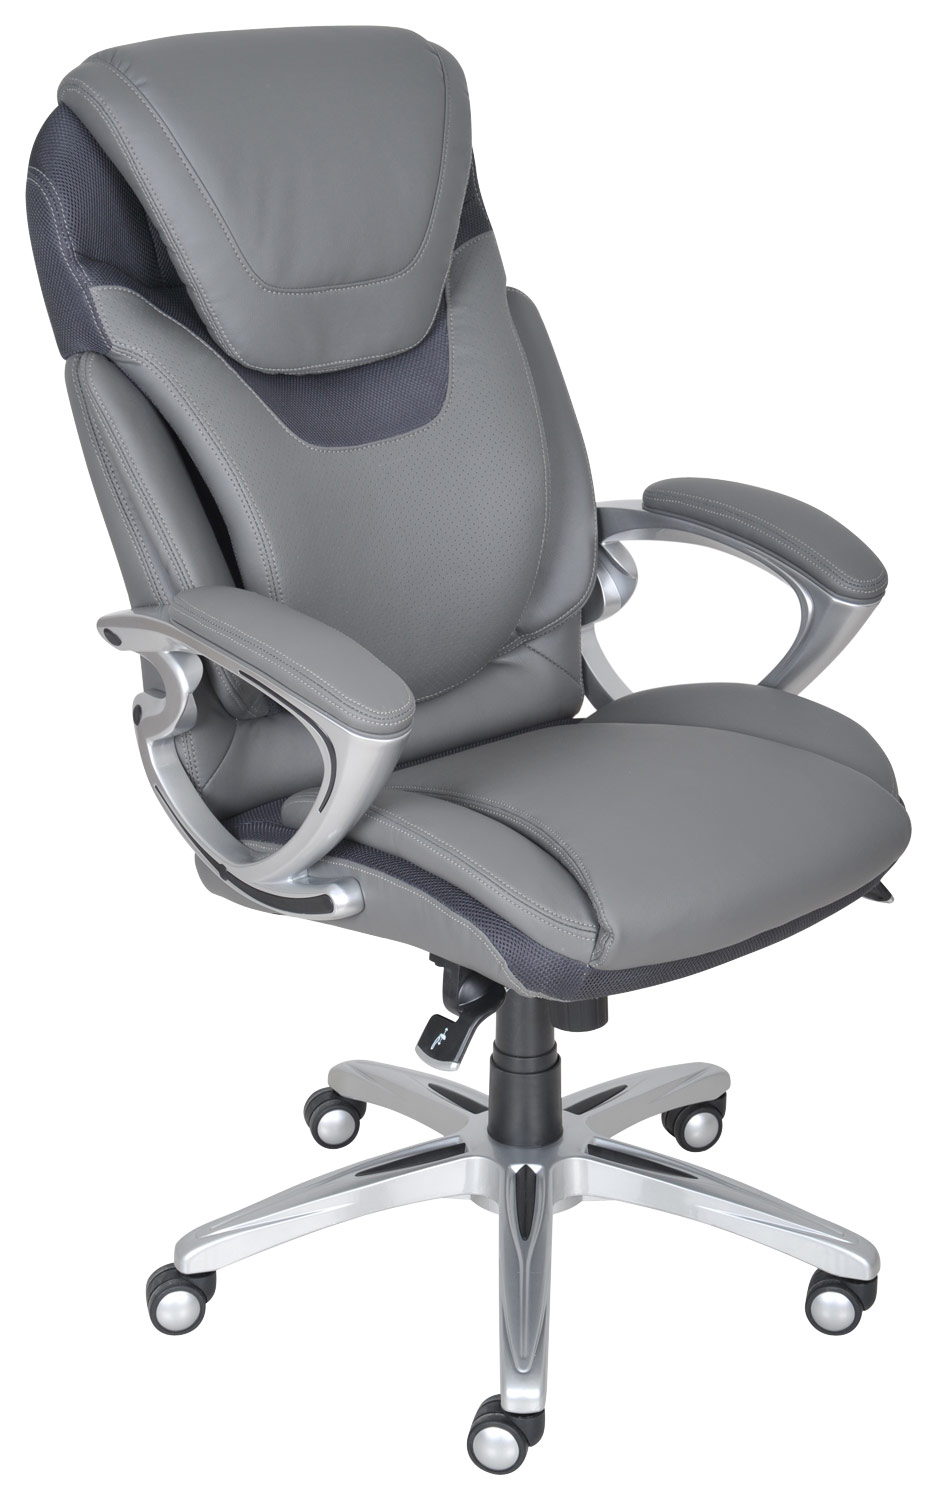 Angle View: Studio Designs - Deluxe Task Chair - Black/Gray